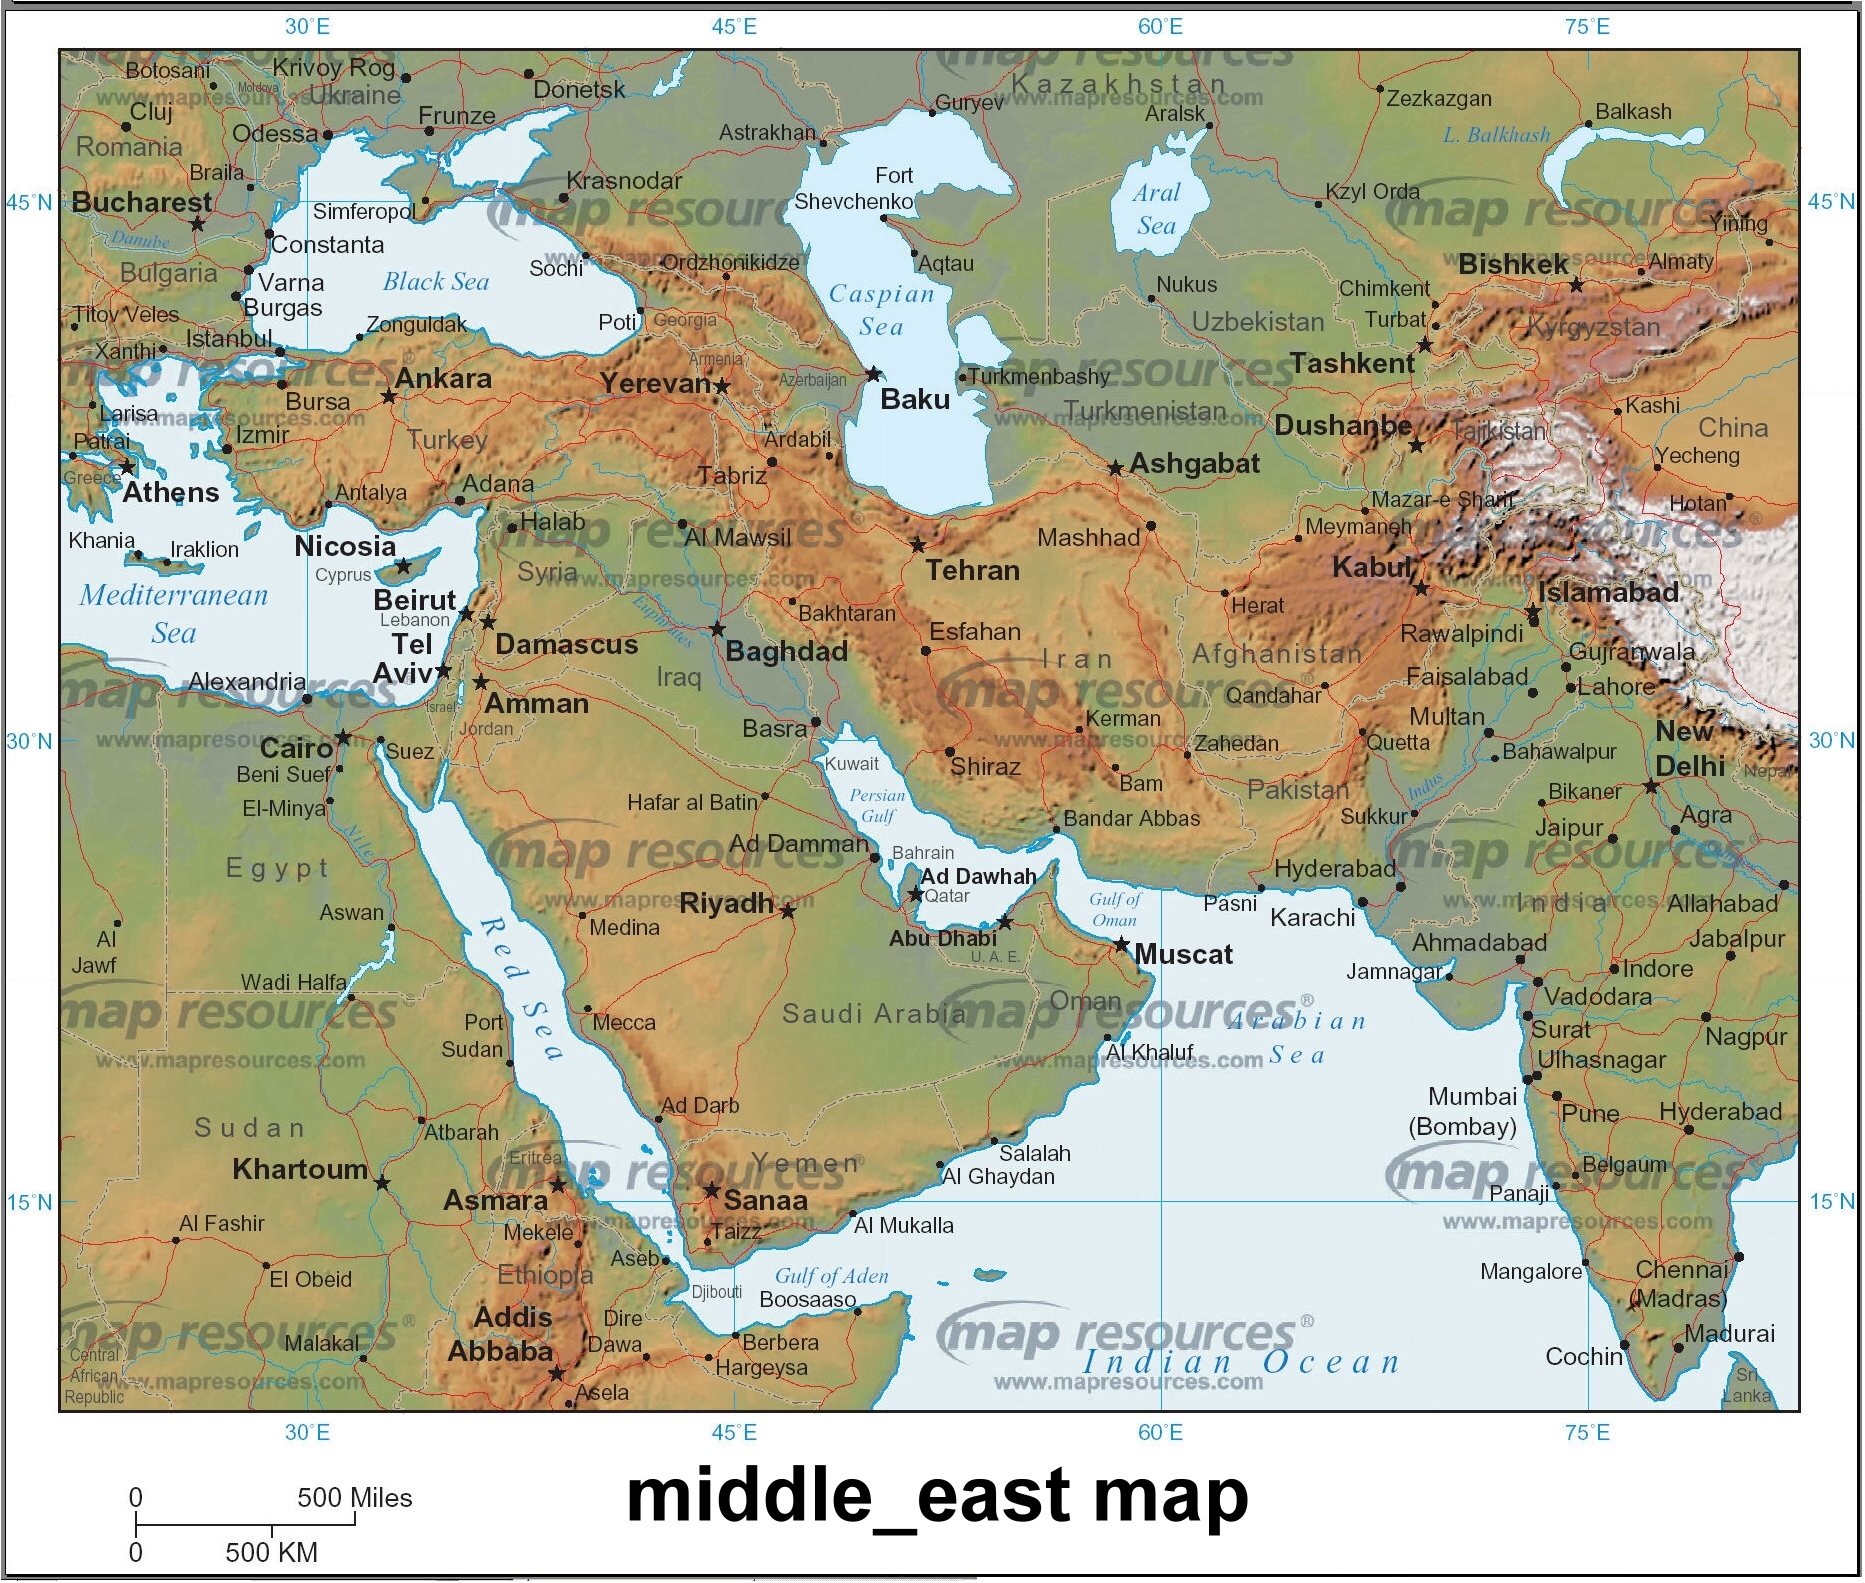 Middle-East-Map.jpg